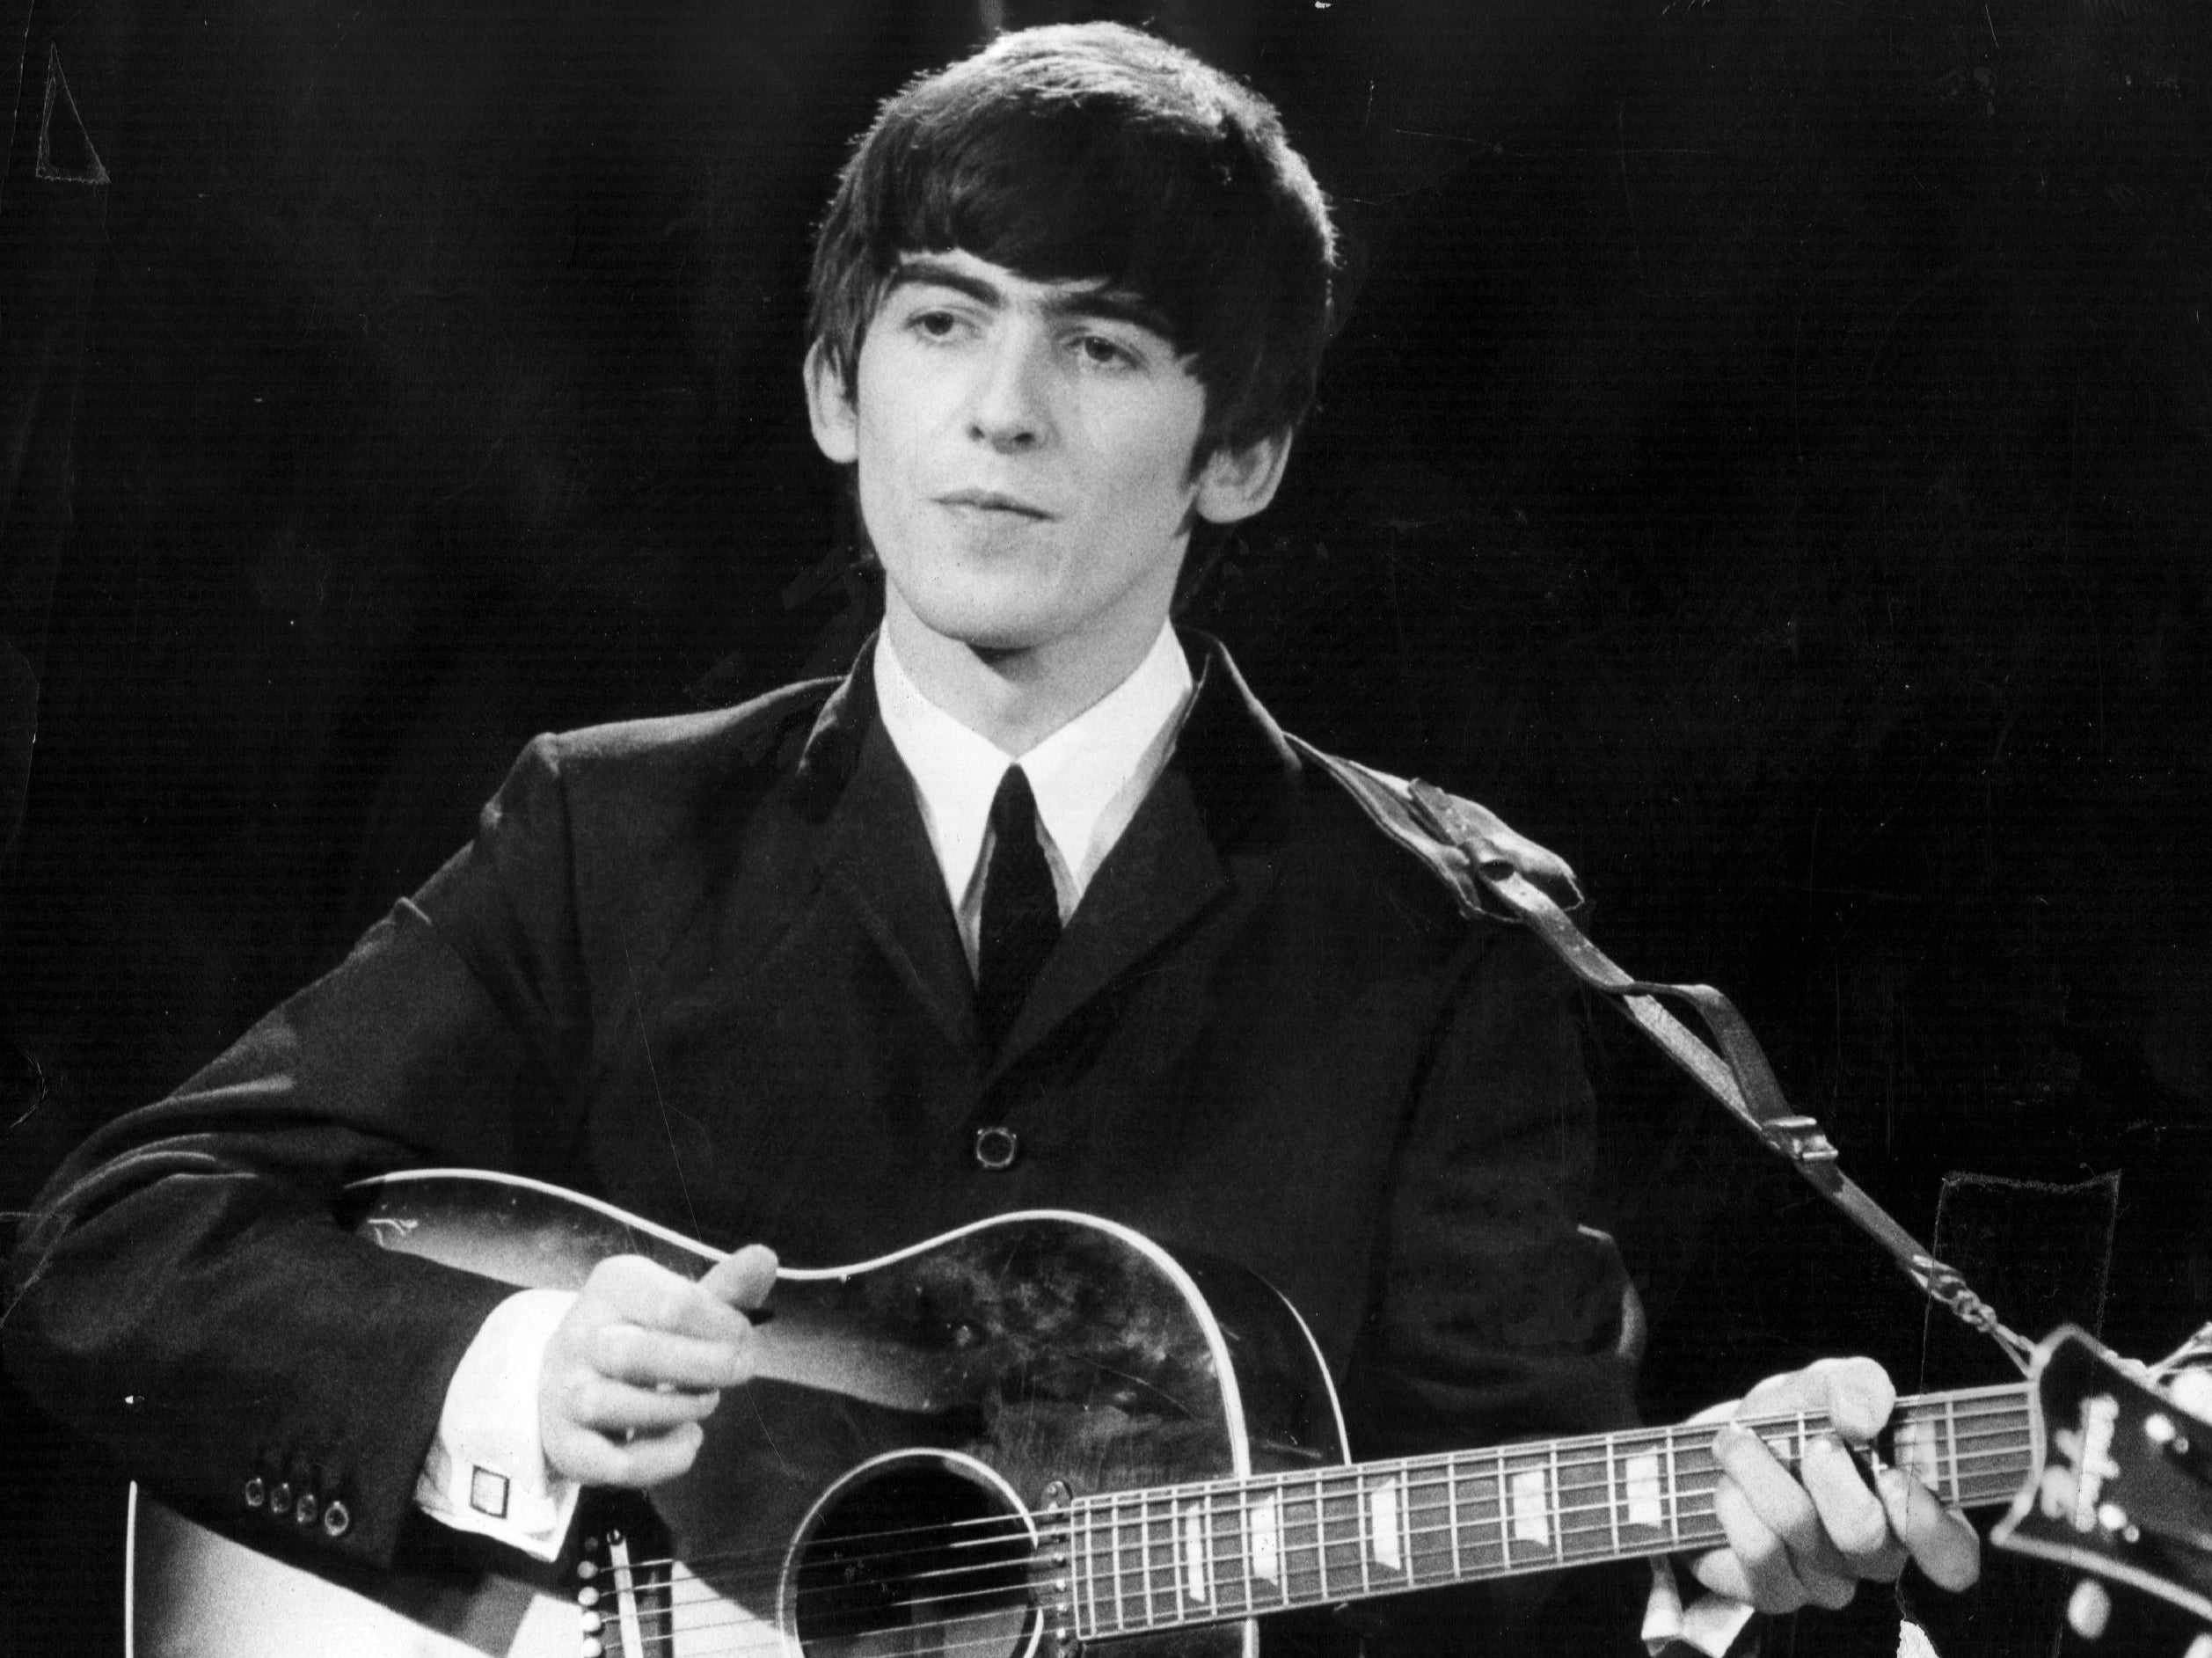 George Harrison was the youngest of The Beatles